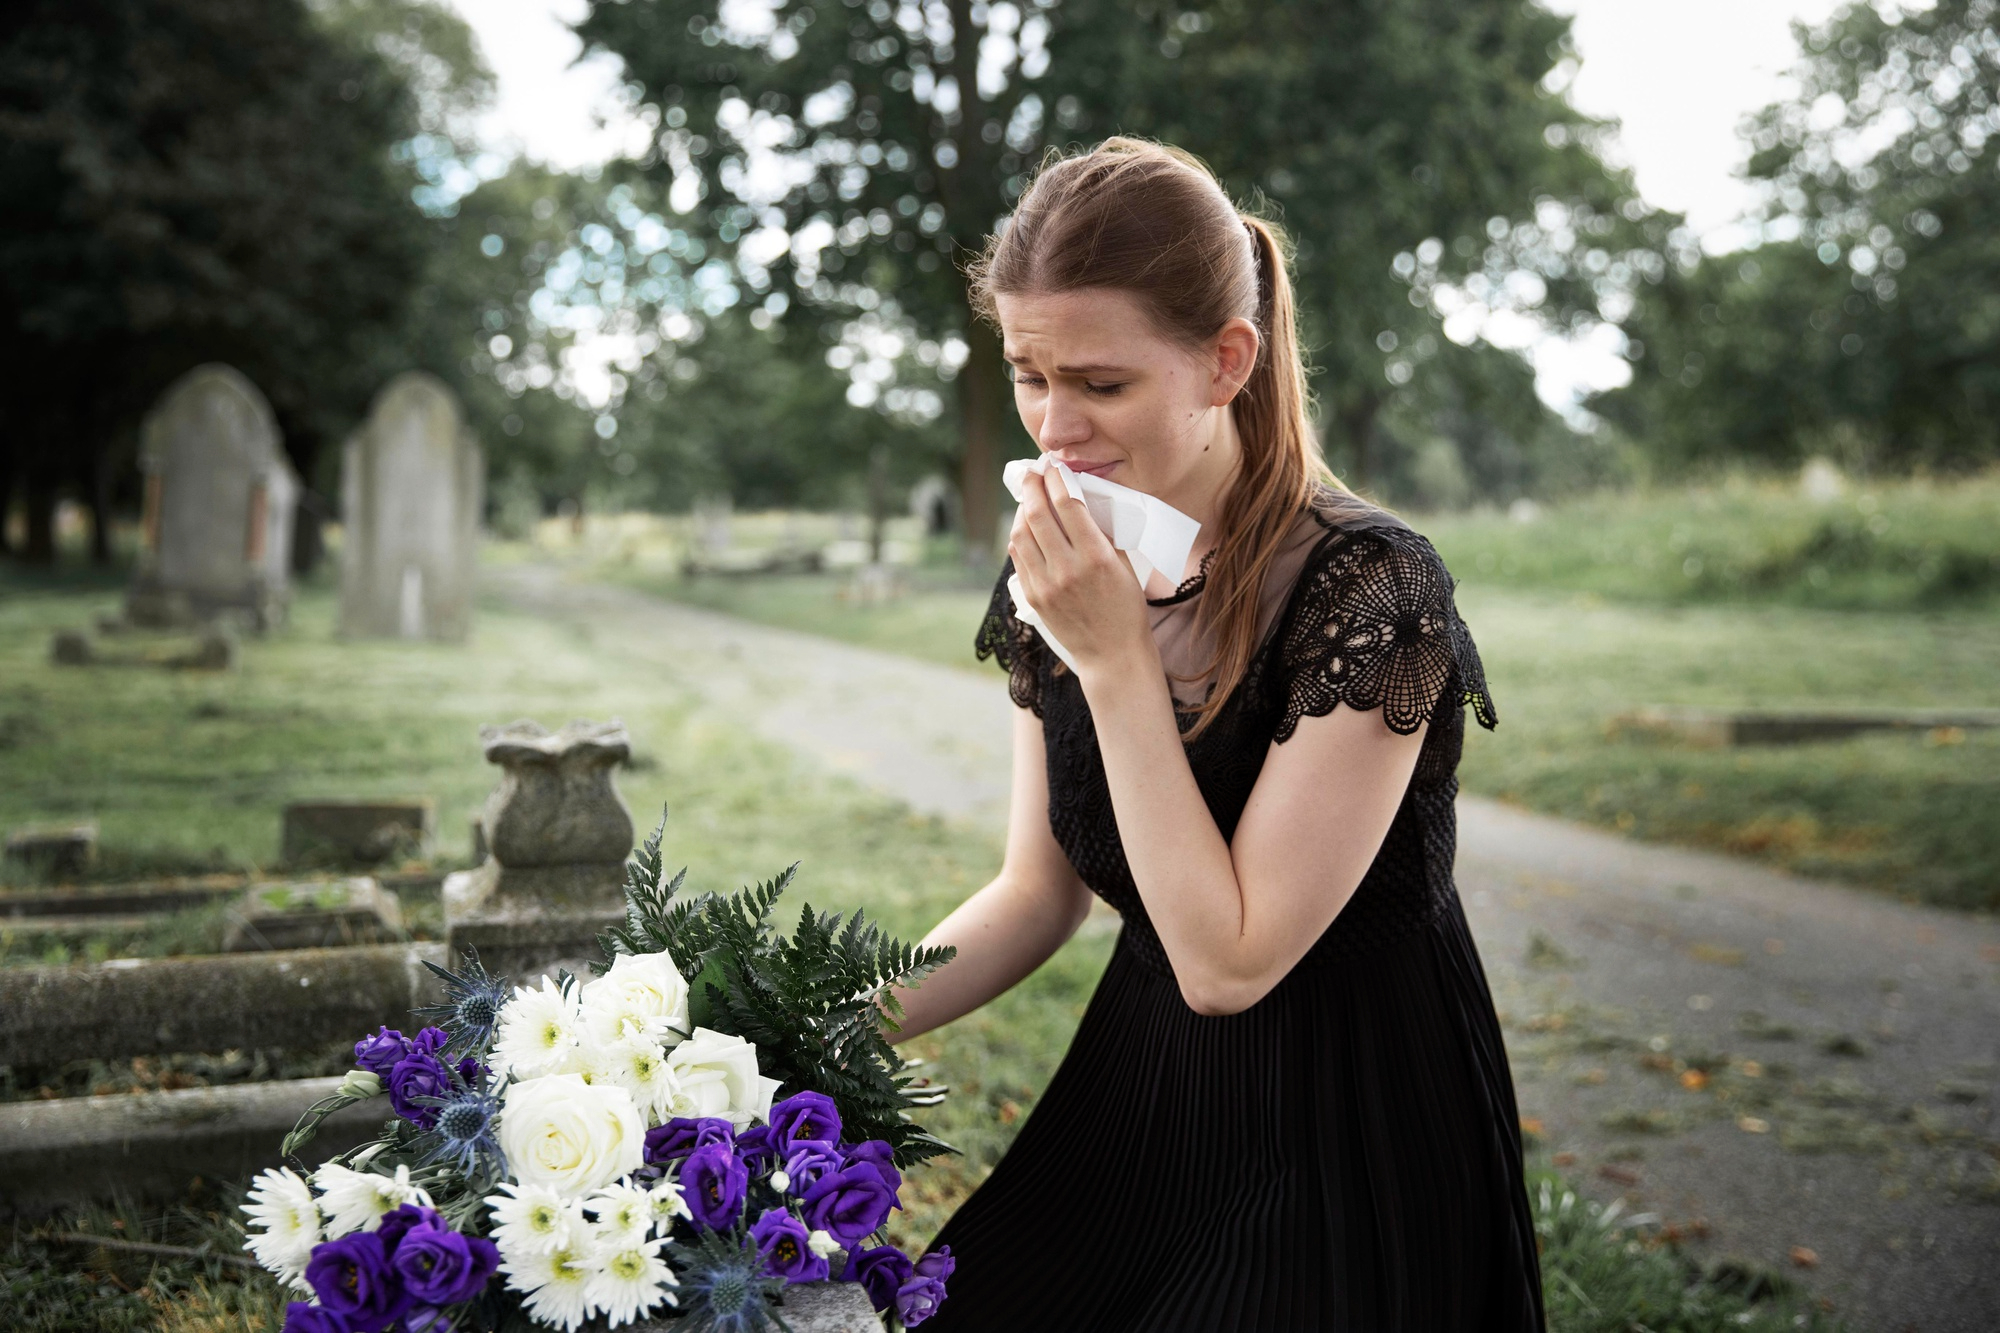 A young woman crying while visiting a loved one's grave | Source: Freepik